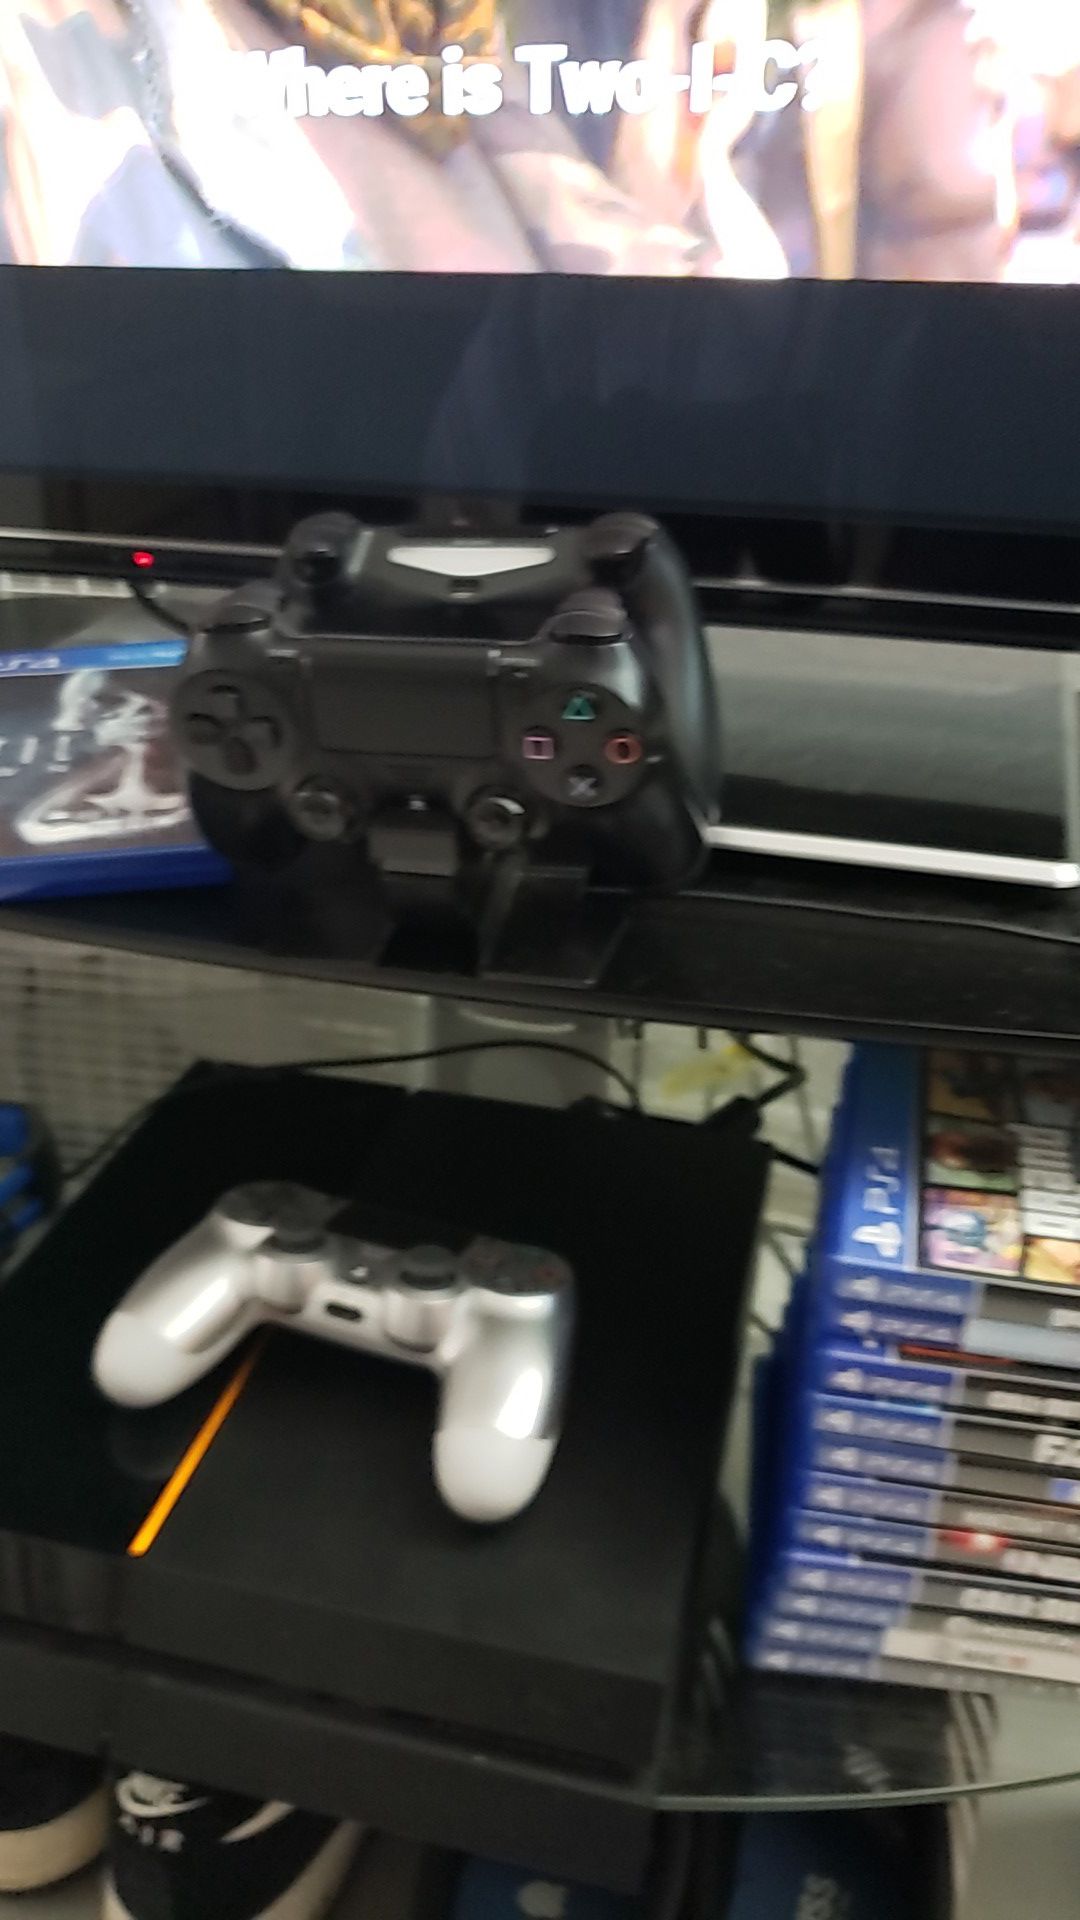 Ps4 3 controllers, headset 500gb will consider trade. Make offer